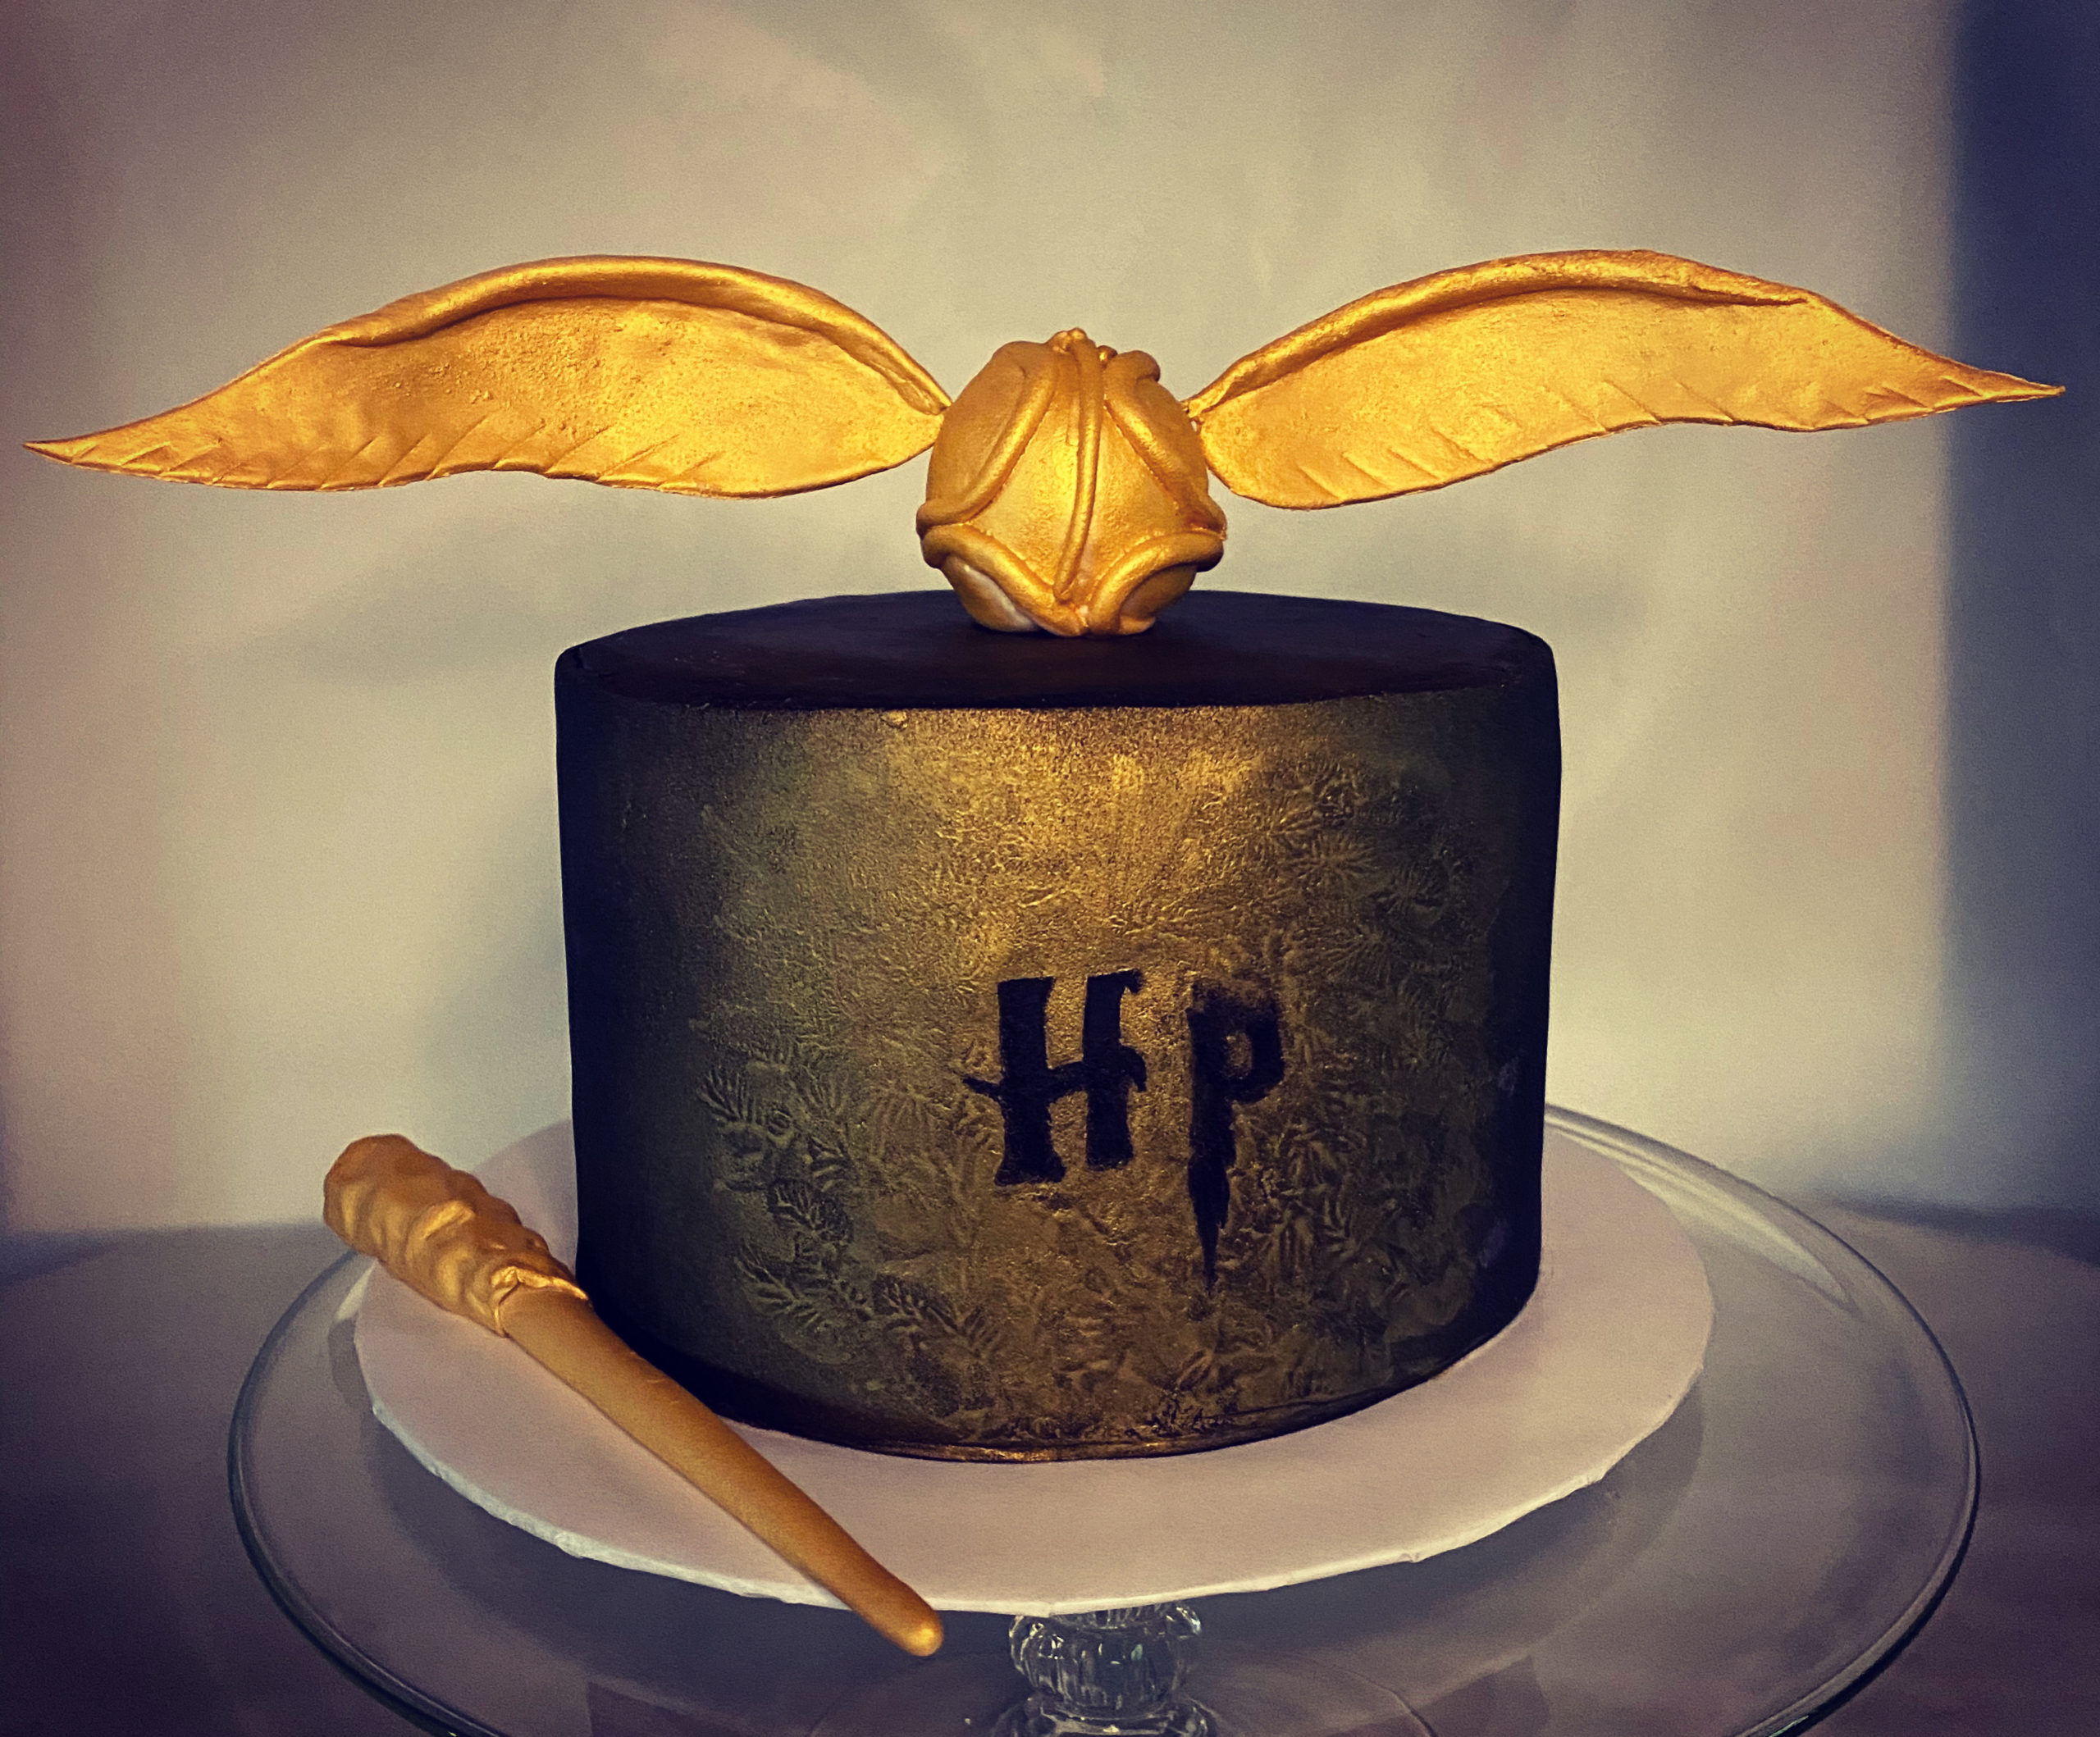 A fantastic character themed birthday cake with hand-crafted decorations from Village Patisserie in Toledo, Ohio